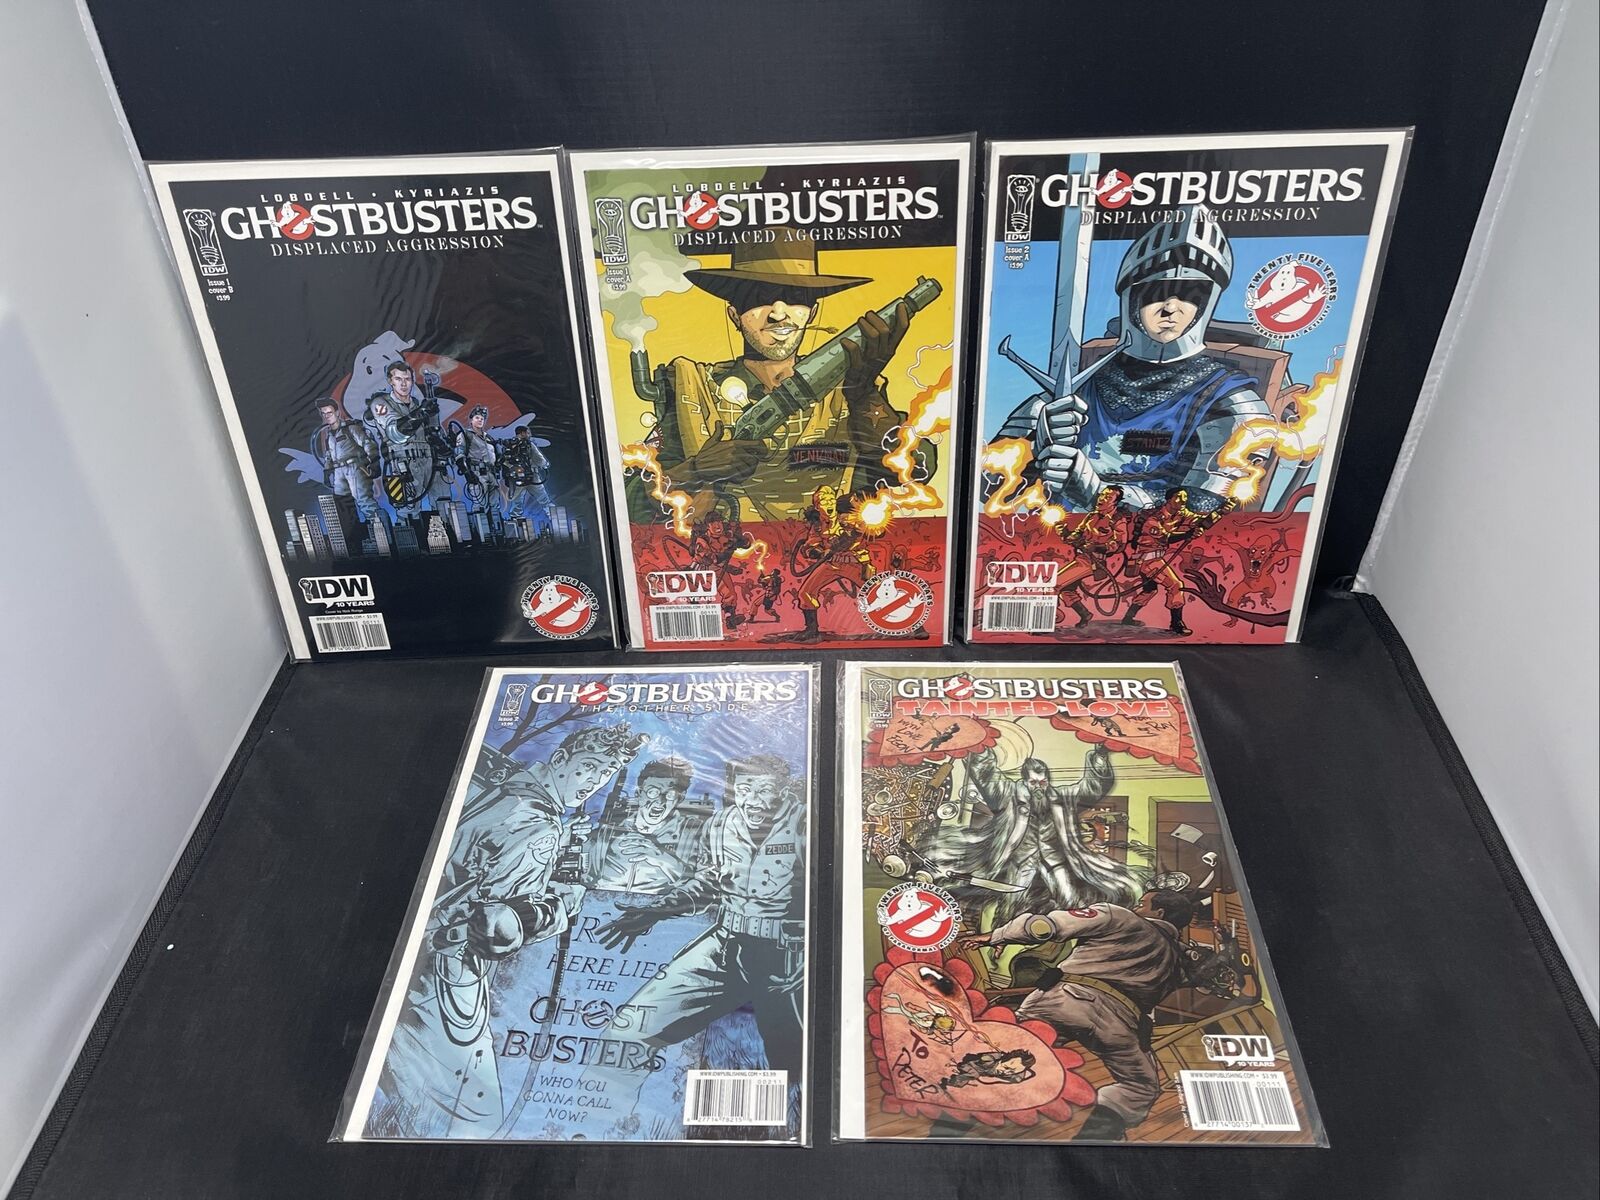 IDW Ghostbusters #1-3 Displaced Aggression & The Other Side, Tainted Love NM Lot